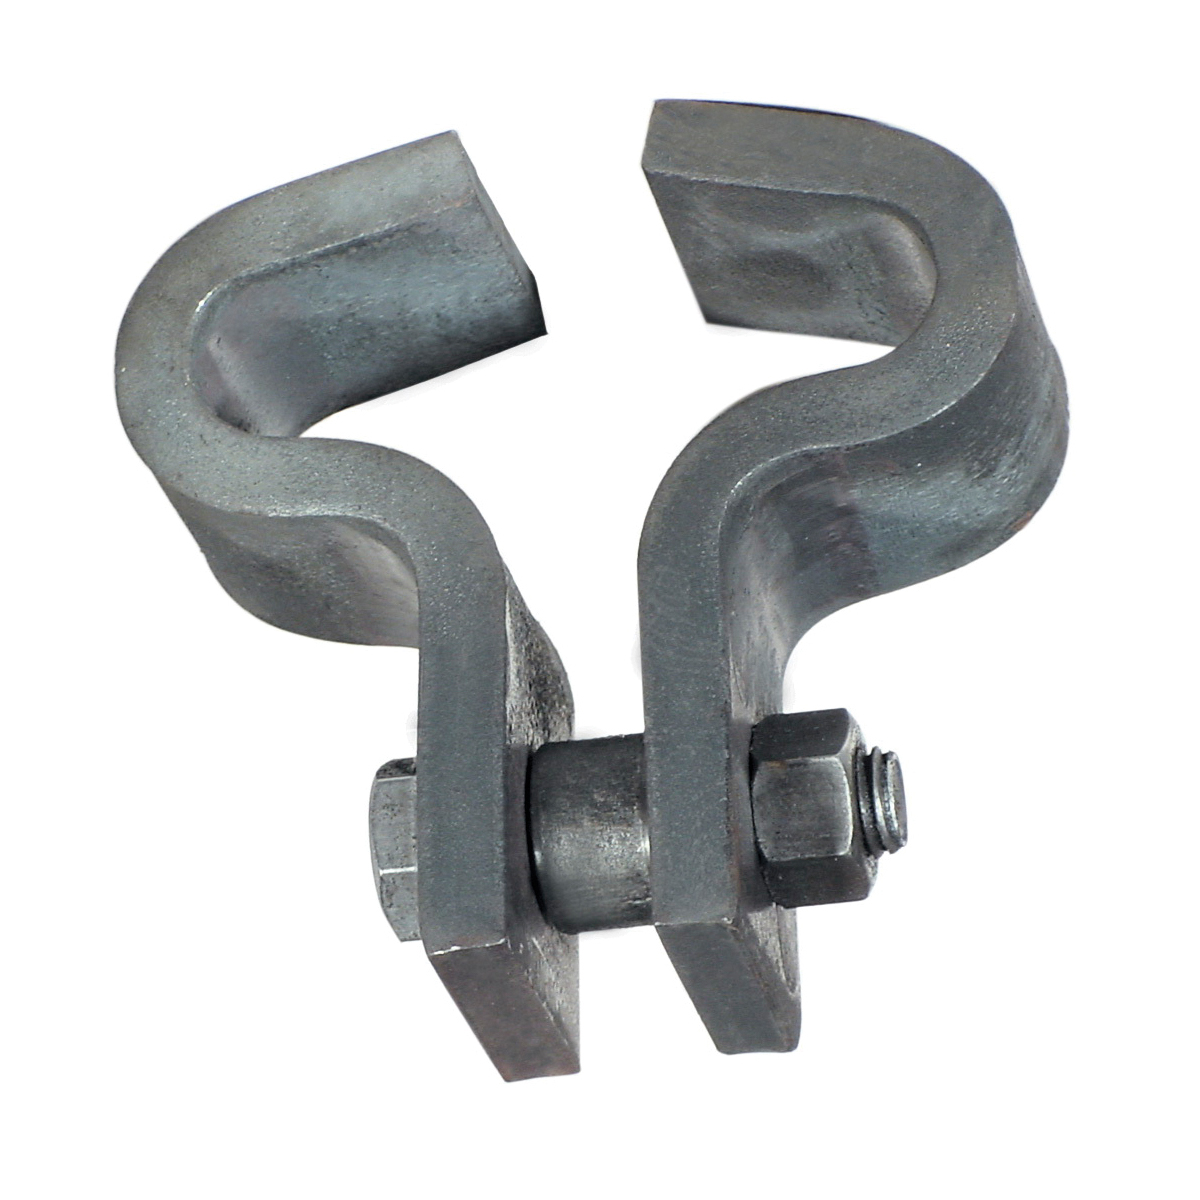 Anvil® 0500315155 FIG 134 Heavy Duty Beam Clamp, 8 in Rod, 7/8 in THK Flange, 3000 lb Load, Carbon Steel, Galvanized